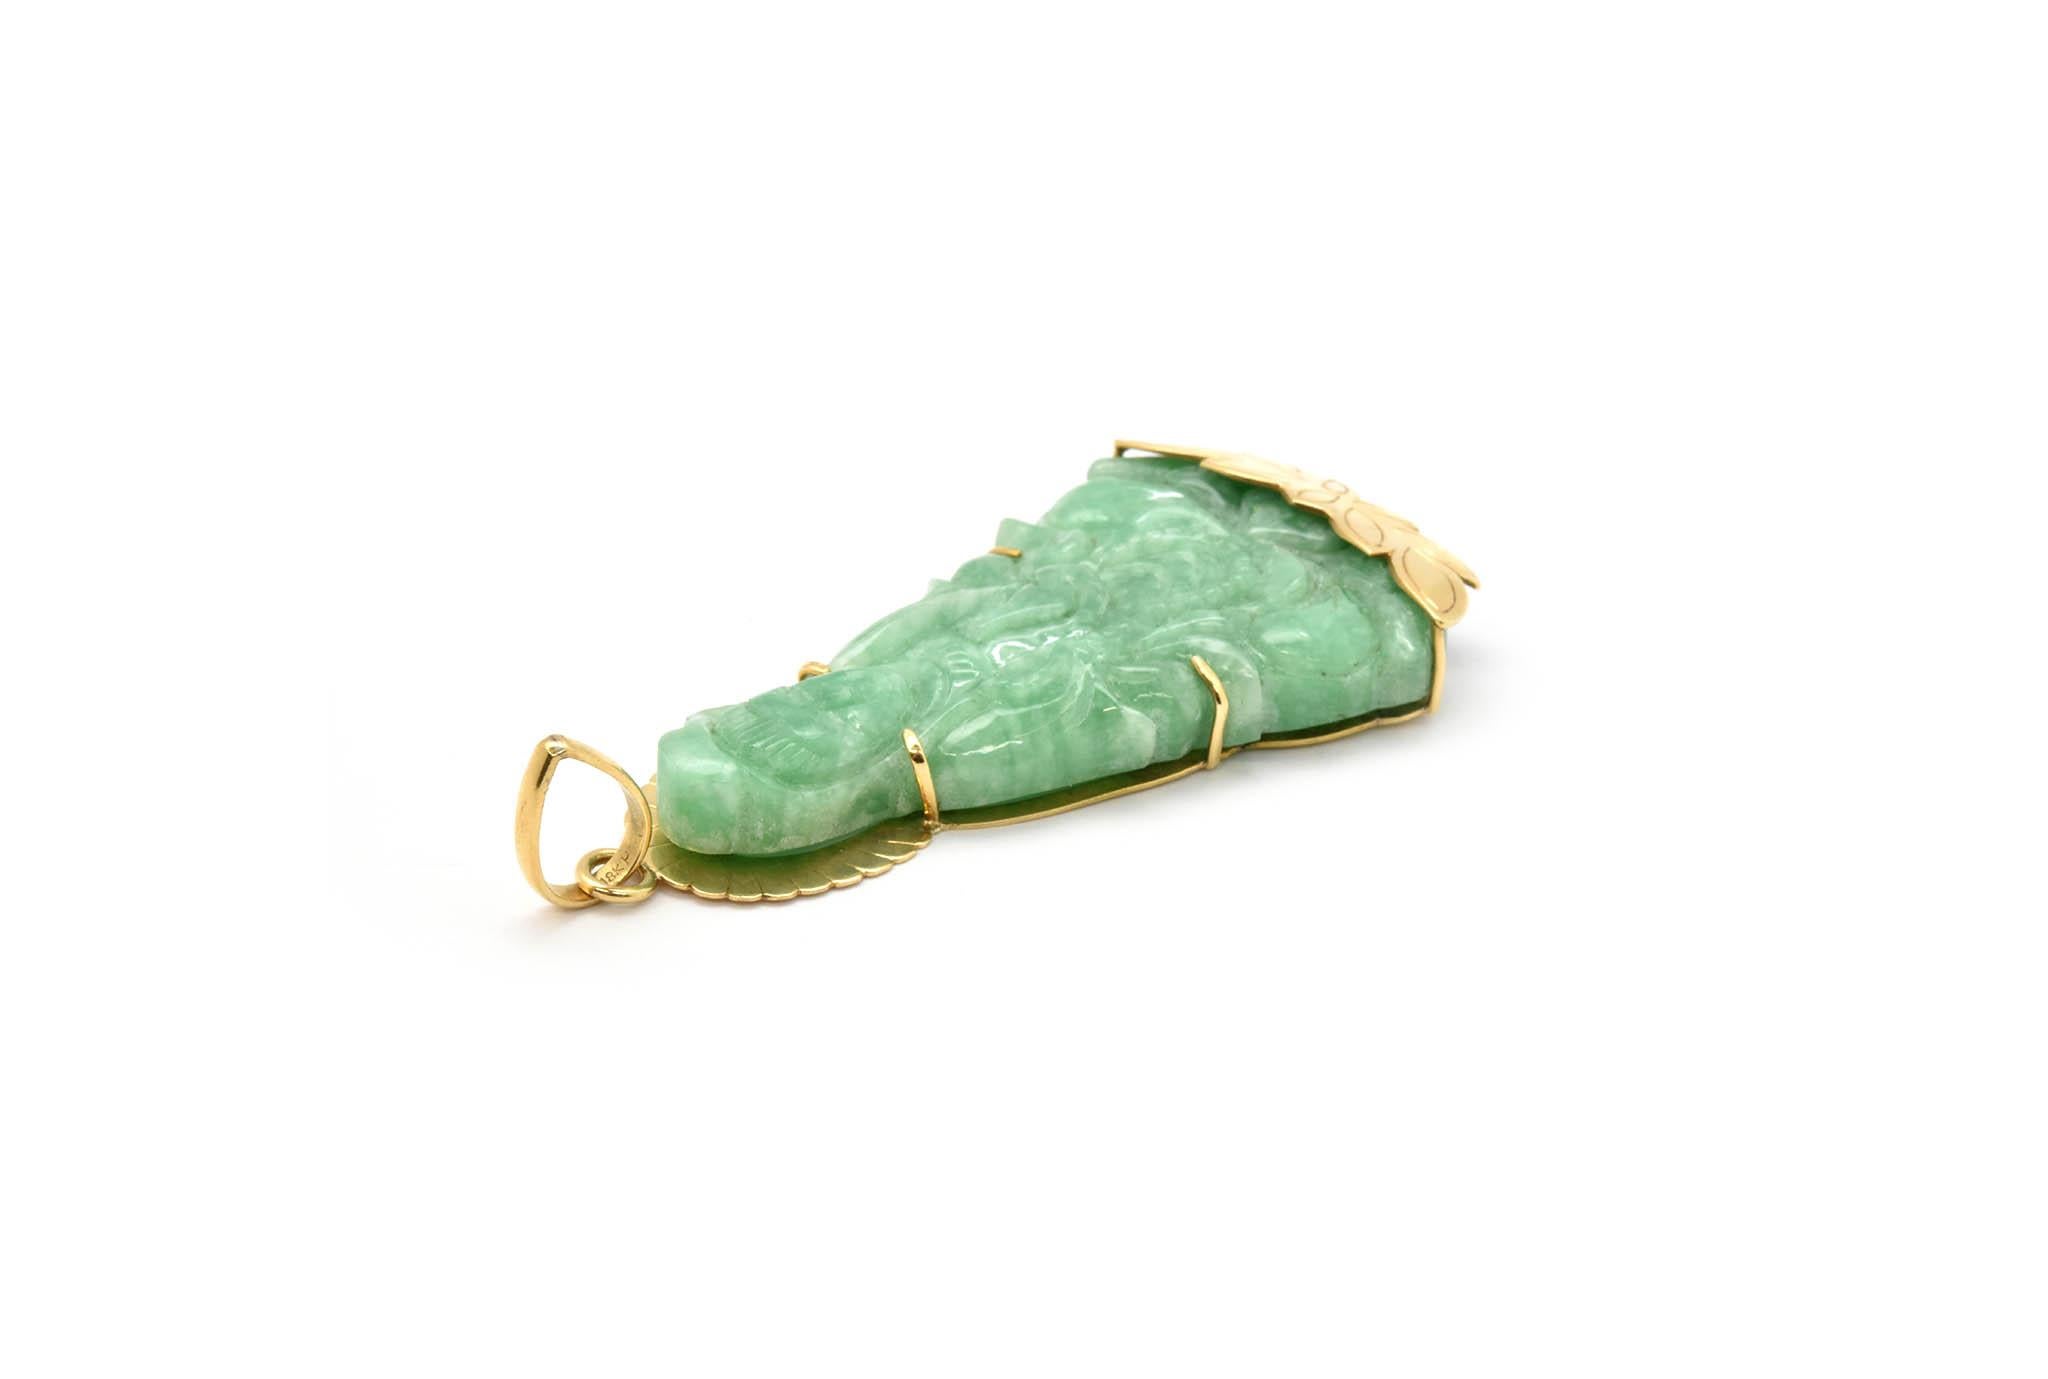 This fantastic pendant features a piece of carved green jade set into 14k yellow gold. The jade is carved into a Buddha. The pendant measures 92x40mm, and it weighs 52.05 grams. 